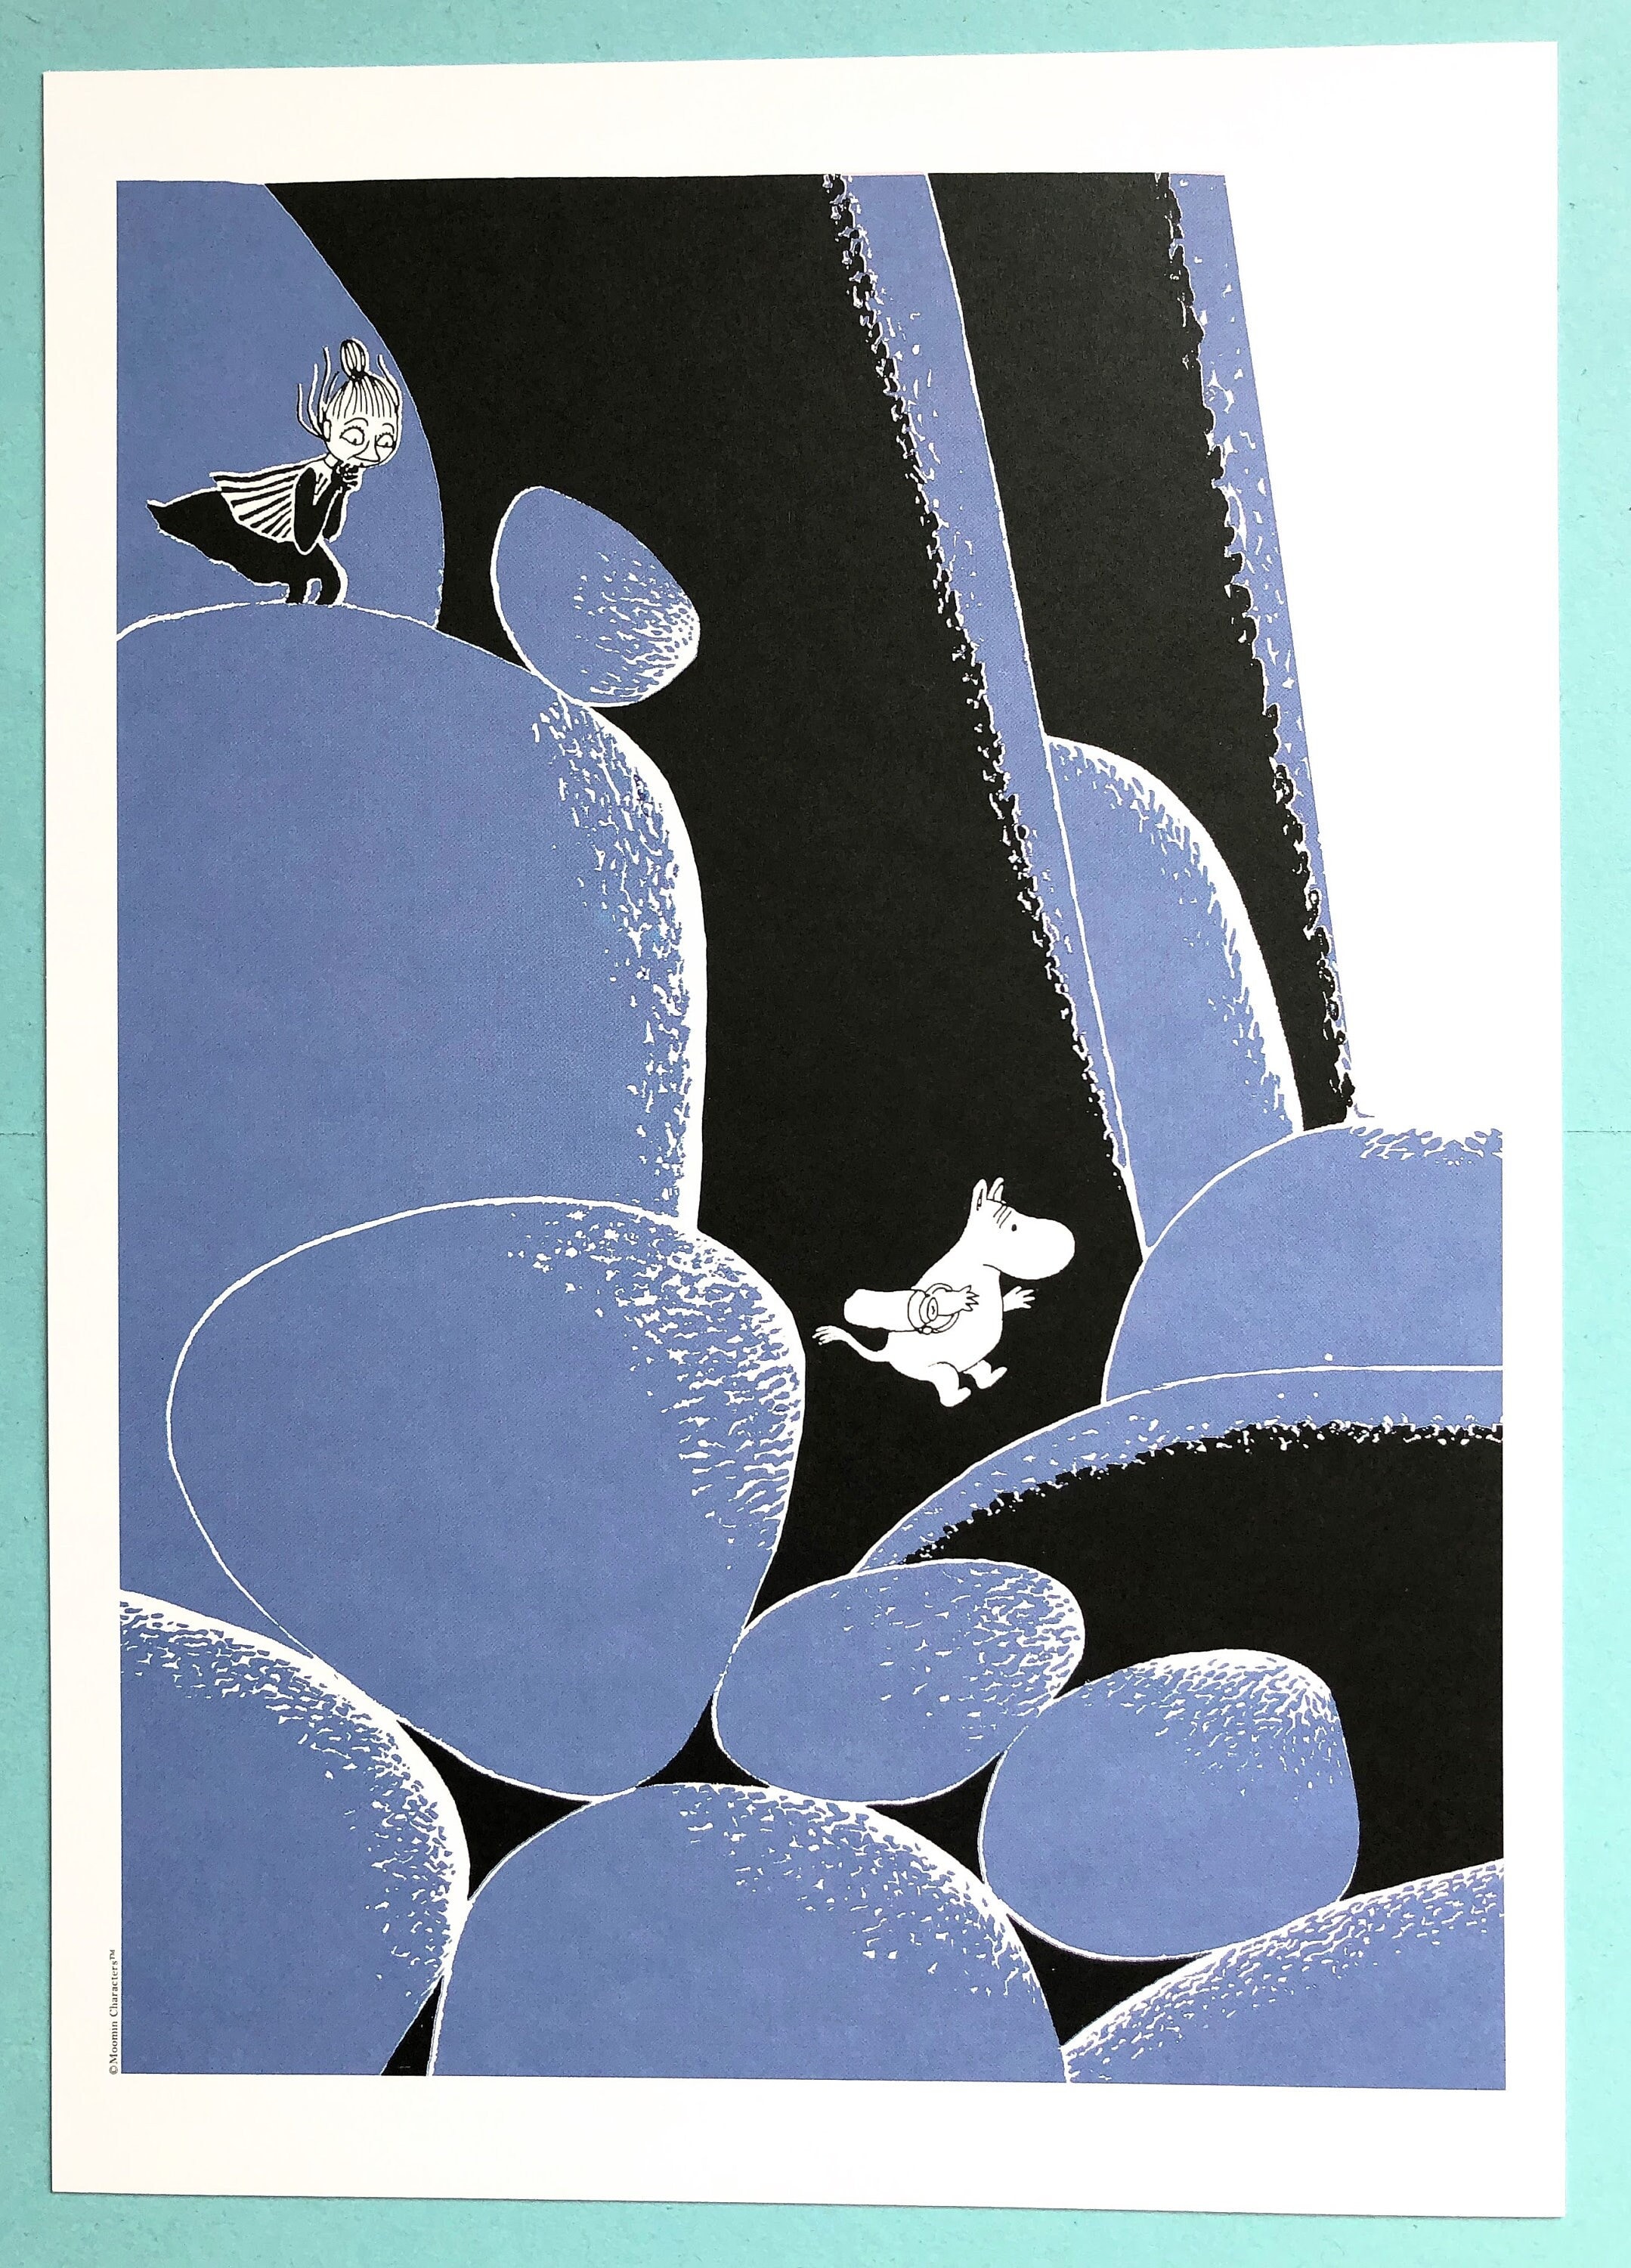 Moomin Reading Art Print by Tove Jansson